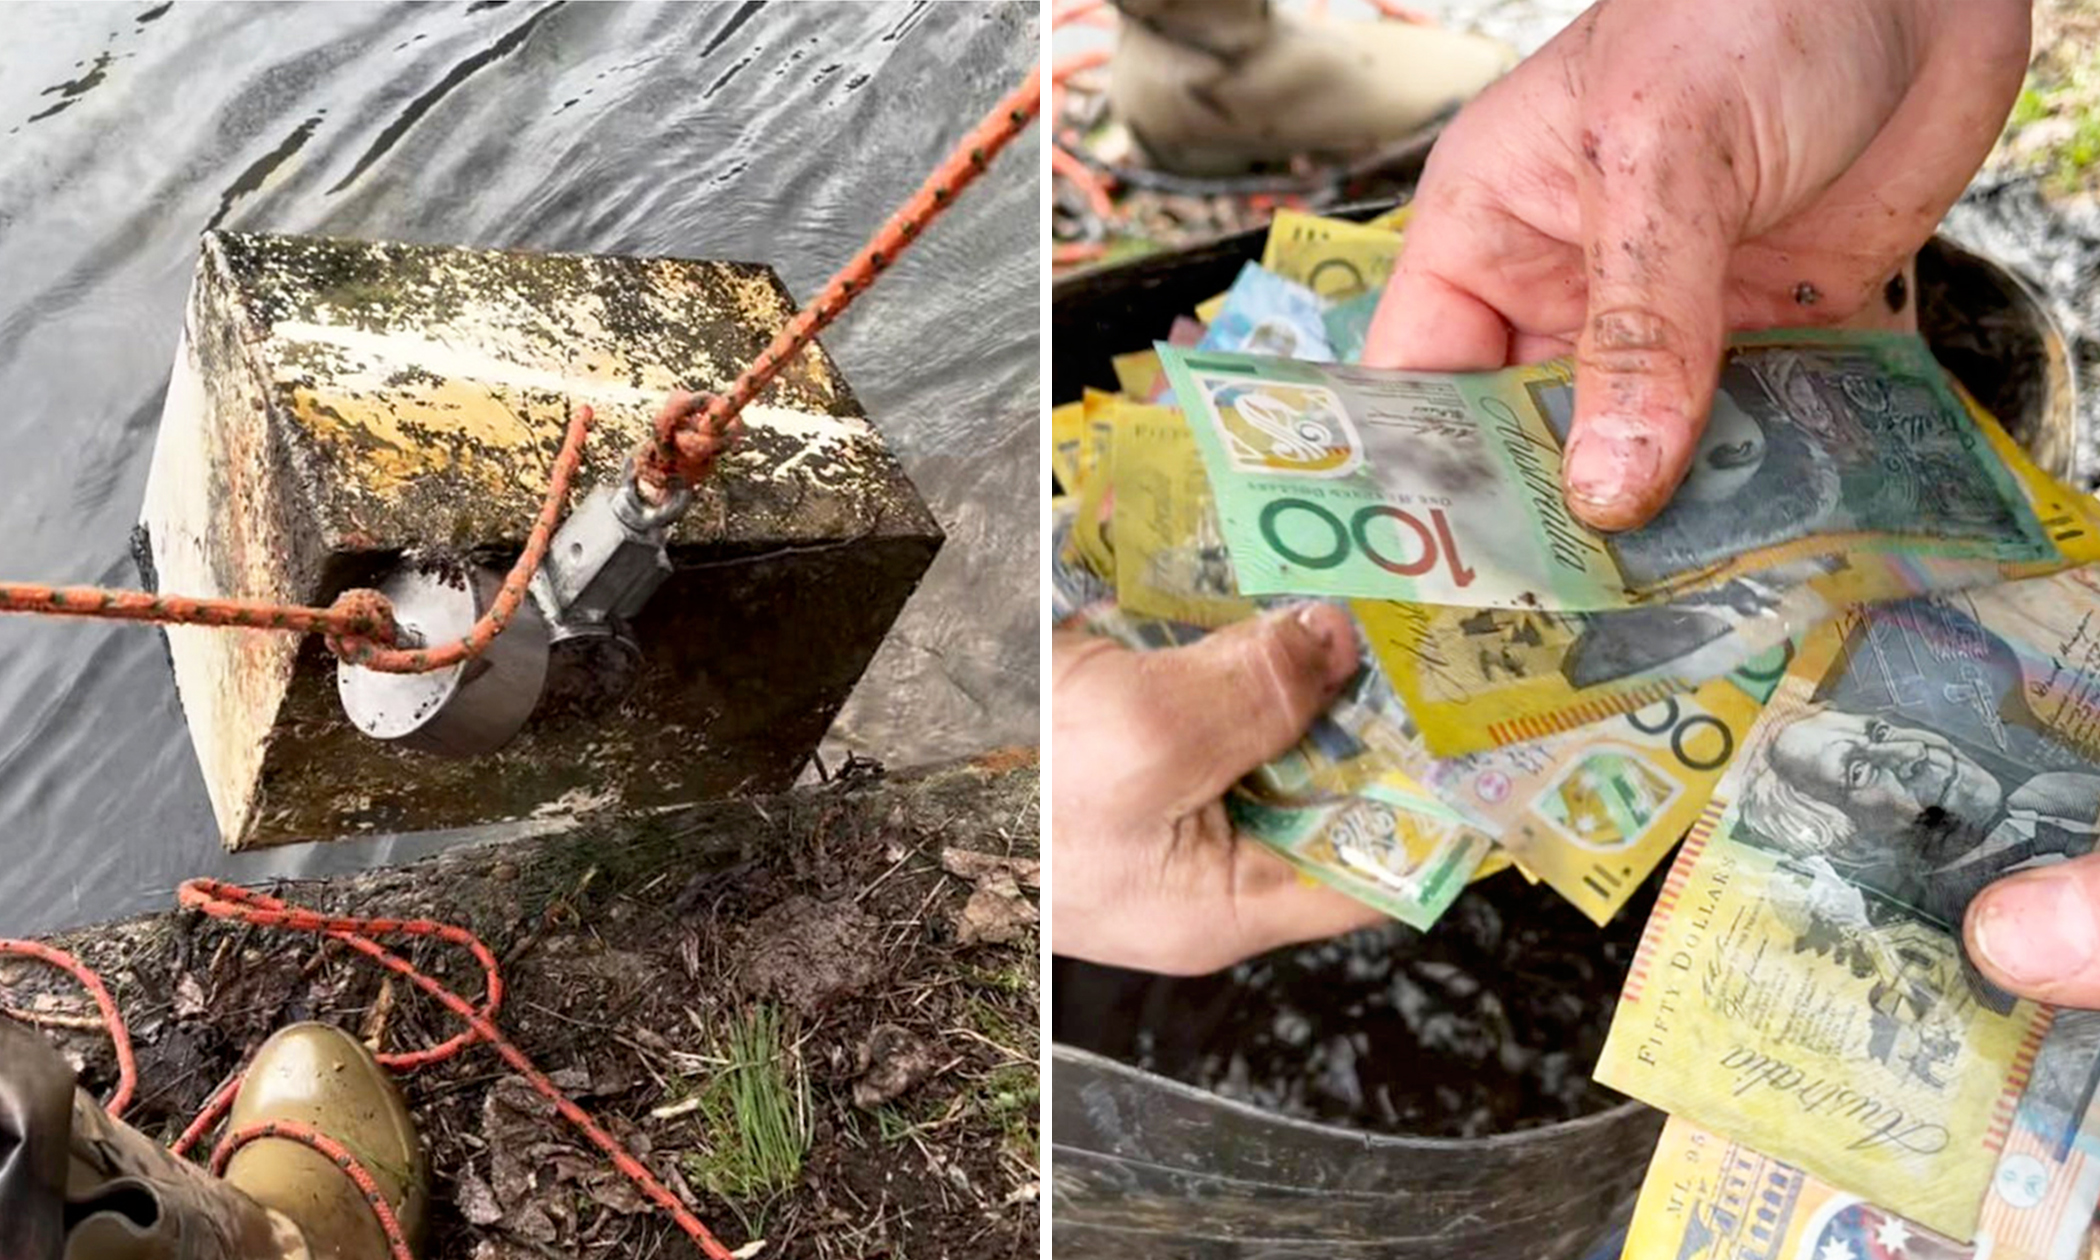 Magnet Fisher, 15, Catches Safe With $1,800, Returns It to Owner From Whom It Was Stolen 22 Years Ago